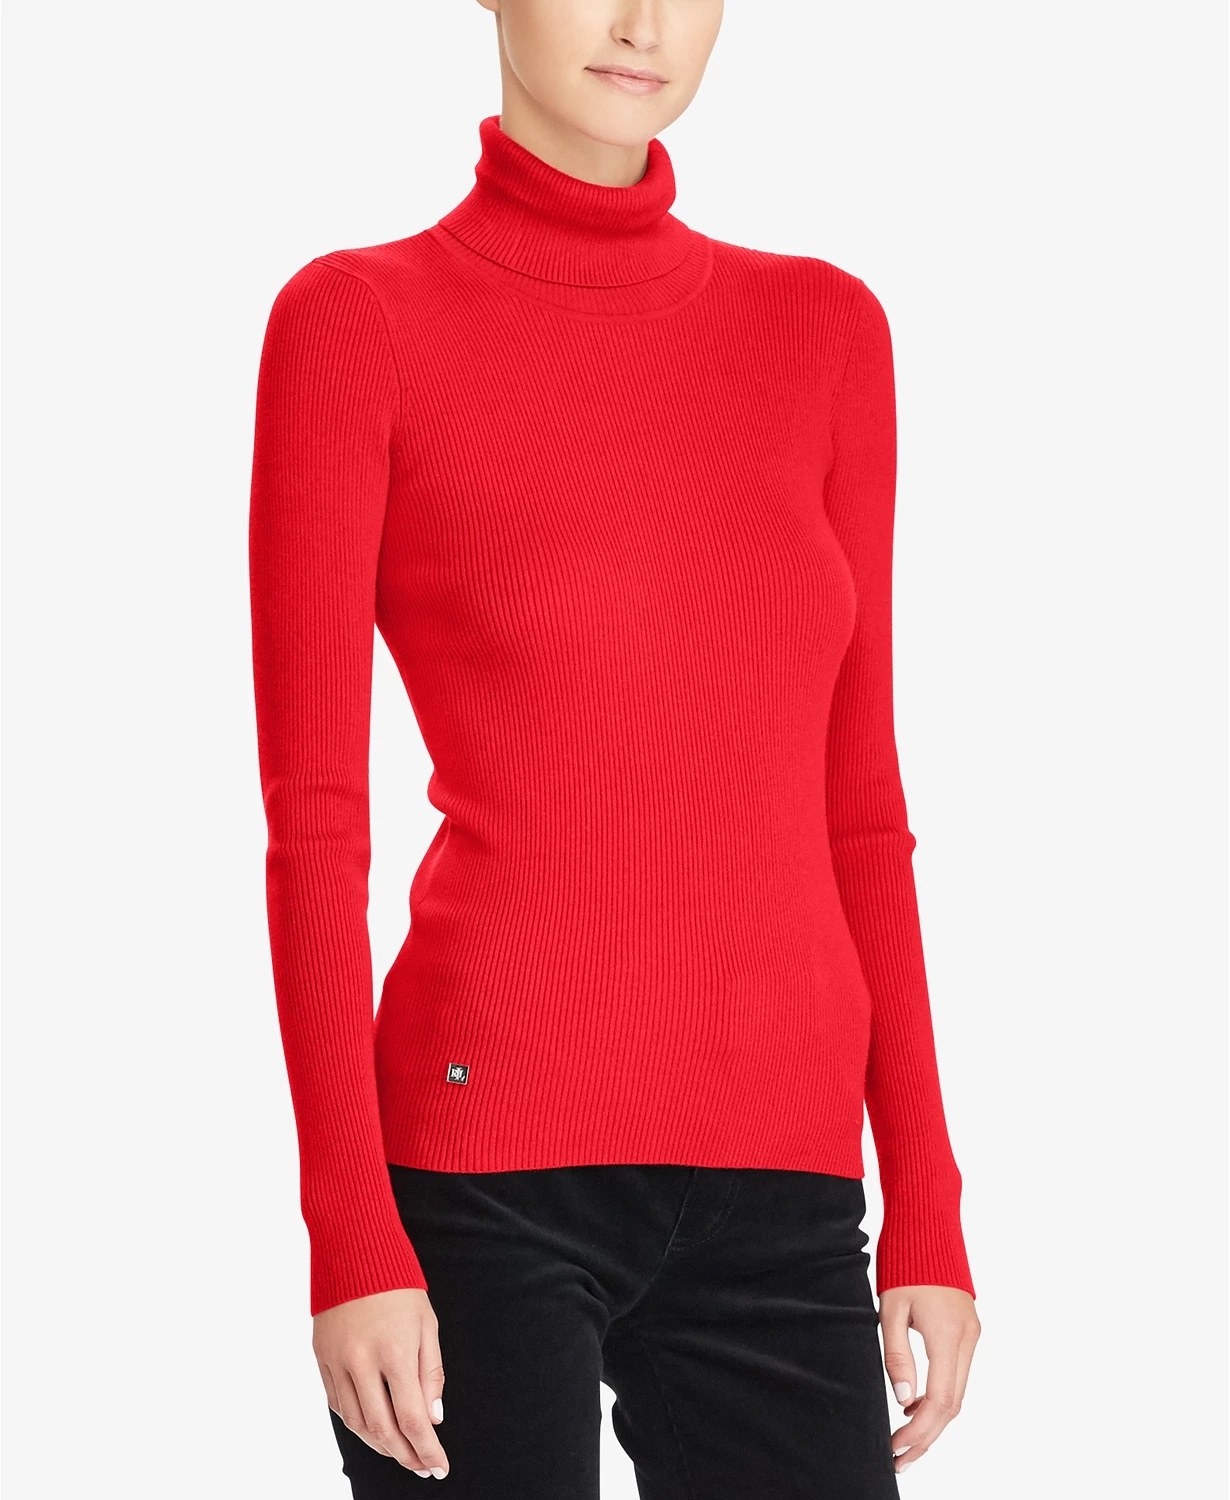 Model wearing red turtleneck with black bottoms